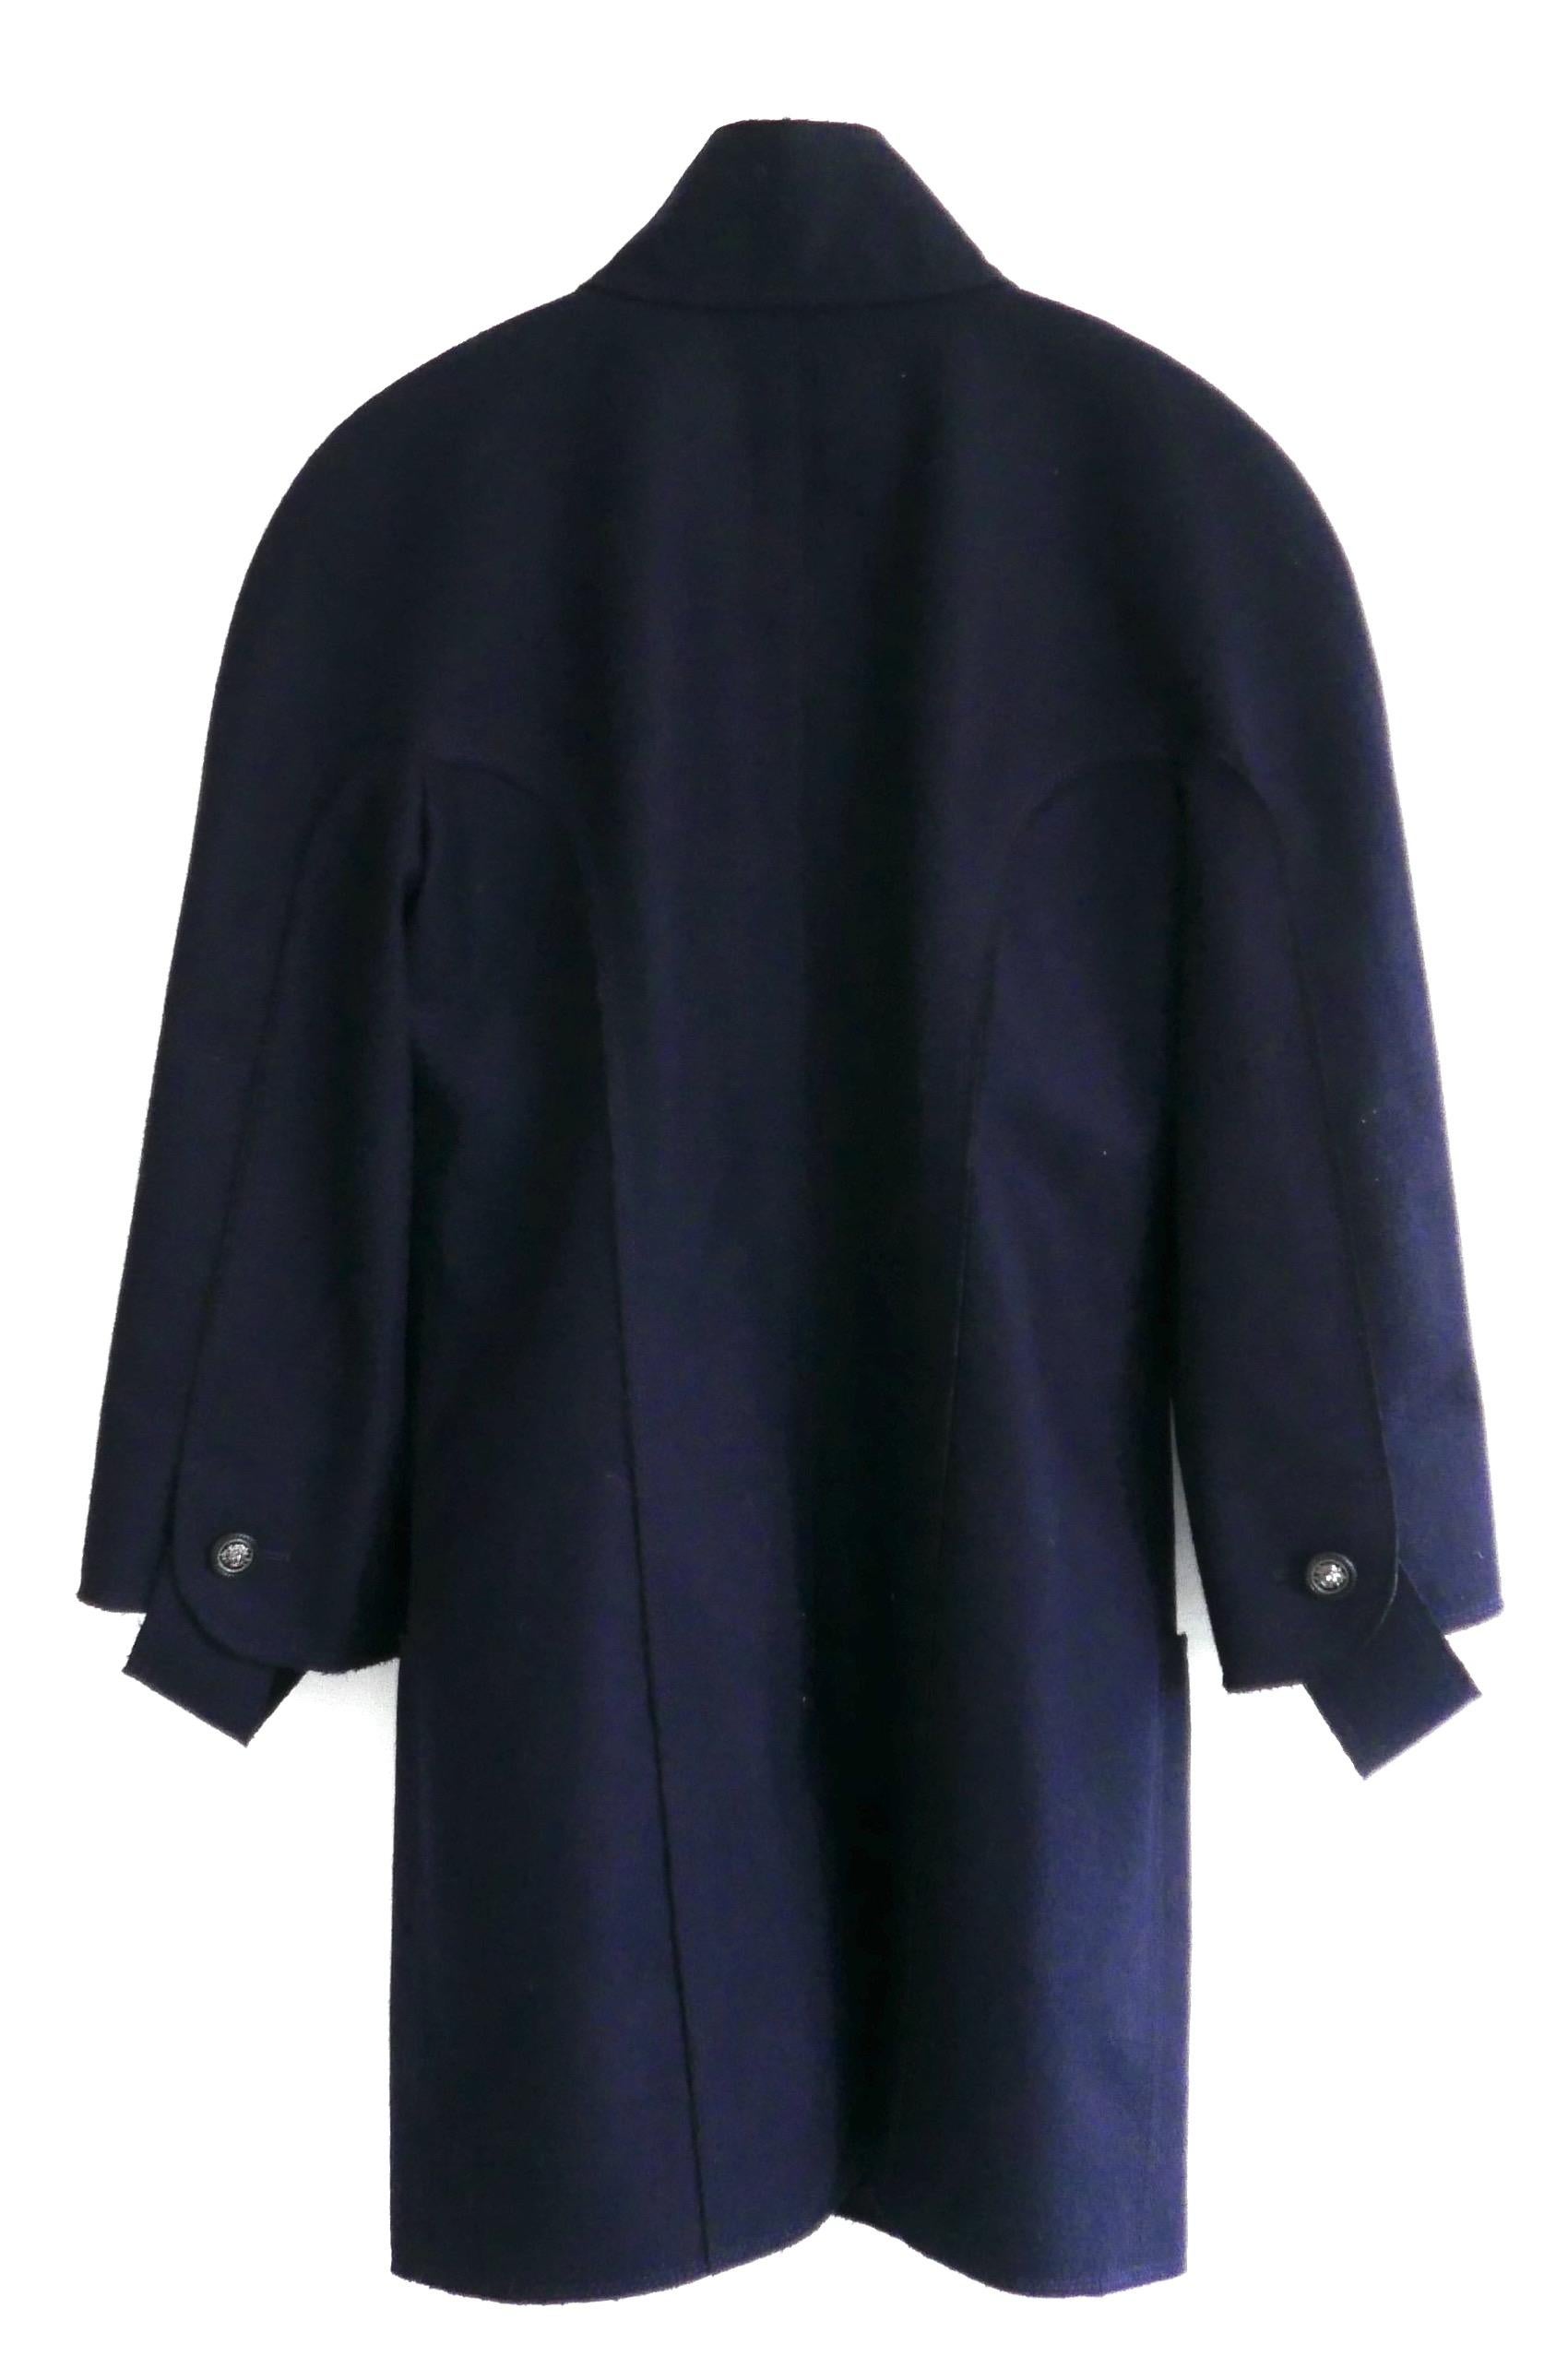 Contemporary classic Chanel navy felted wool coat from legendary Fall 2014 ’Supermarket’ collection. Unworn. 
Made from soft navy felted wool mix with raw edged detailing. It has a gorgeous shape with lightly padded rounded shoulders, curved